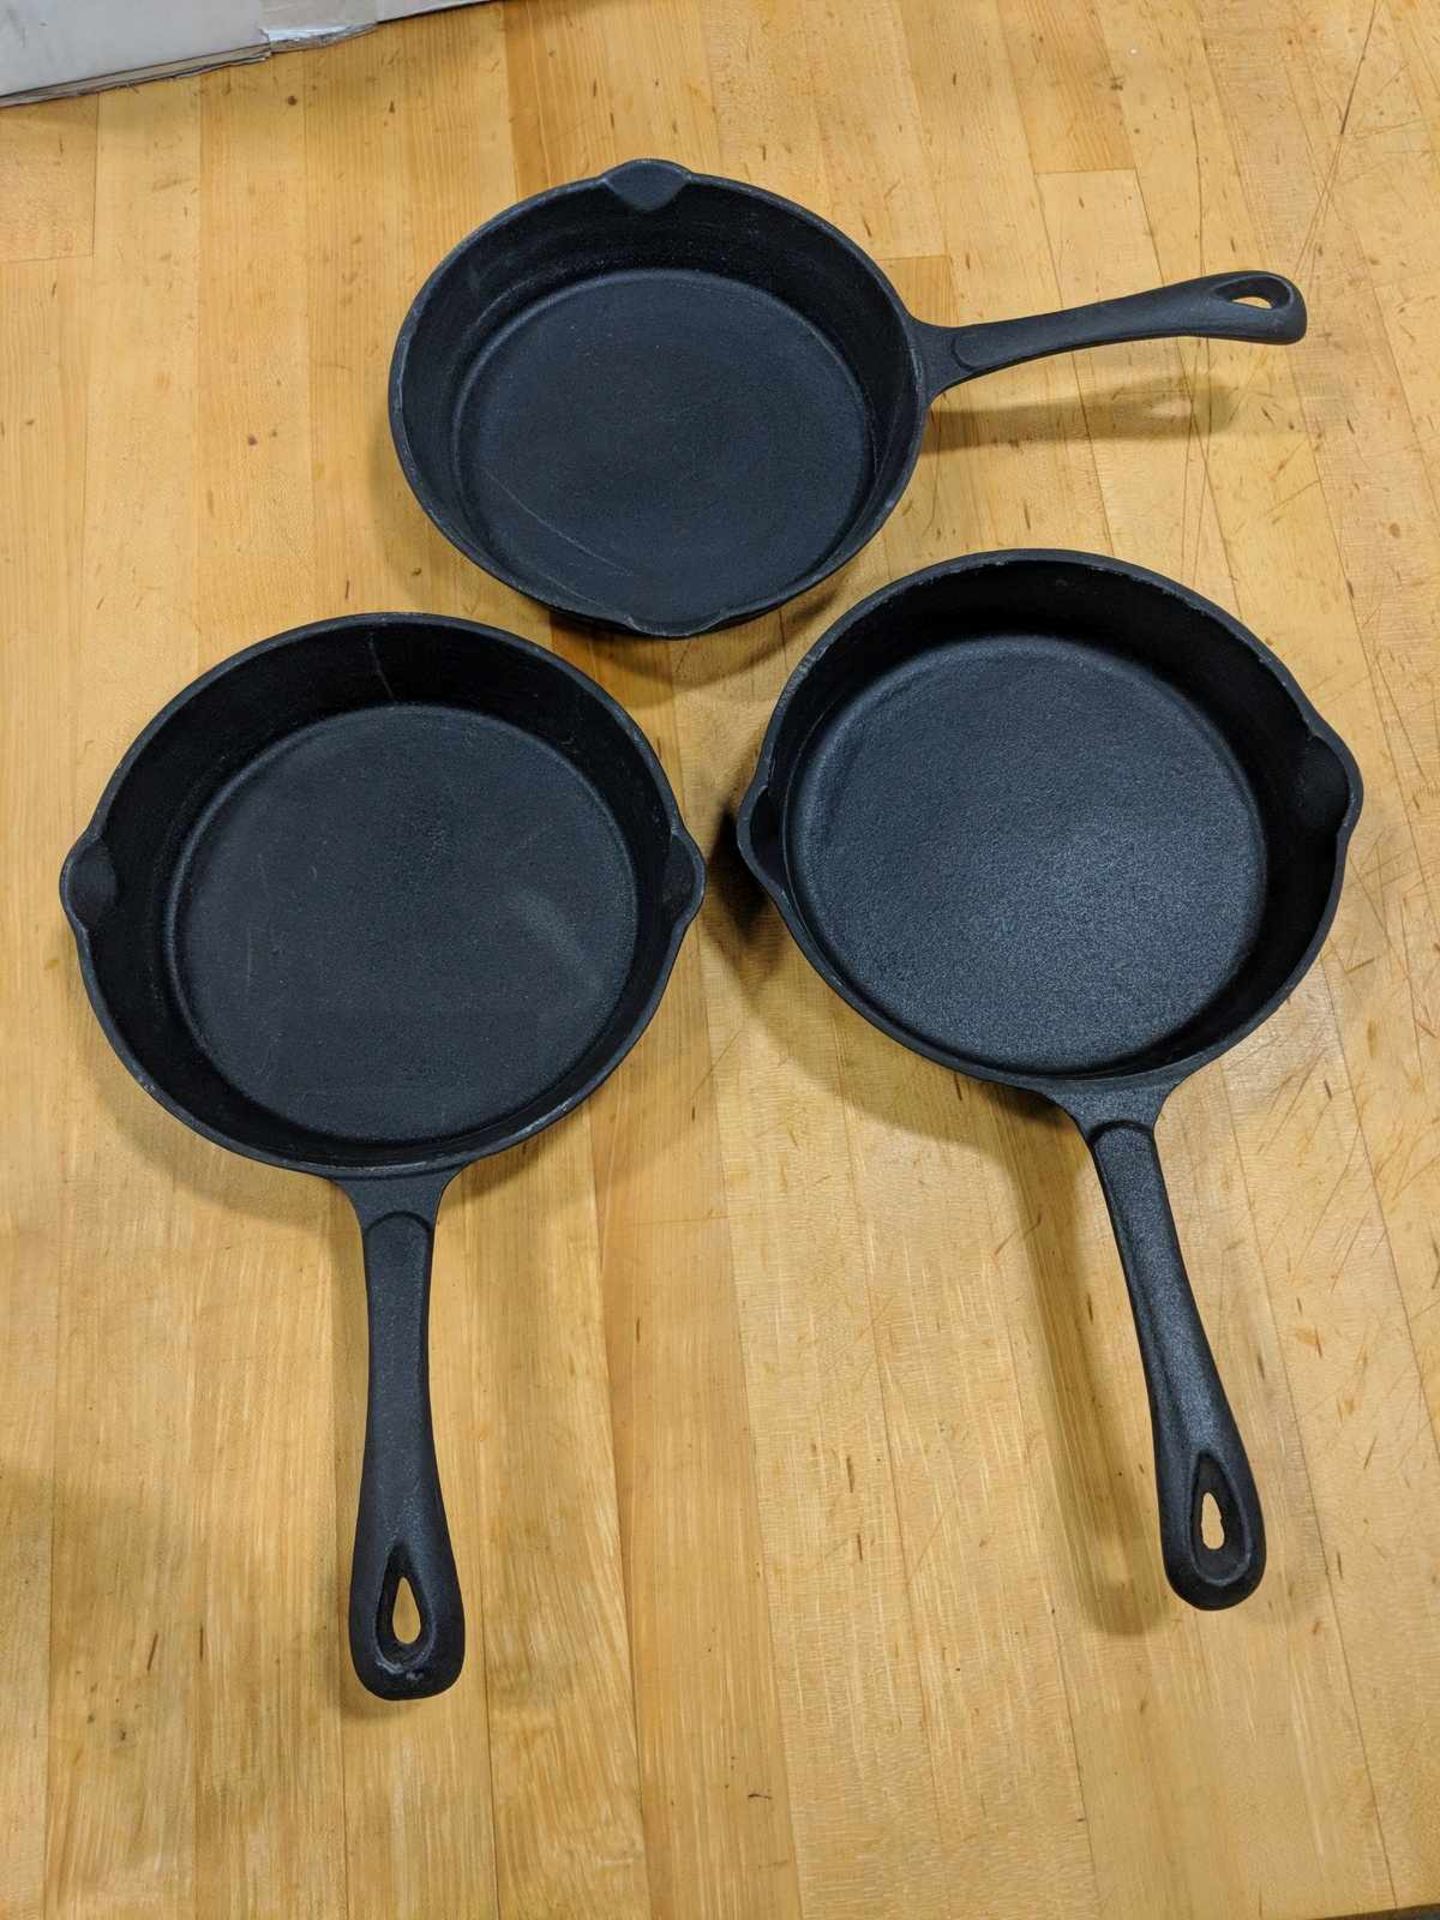 8" Cast Iron Skillets, Winco RSK-8 - Lot of 3